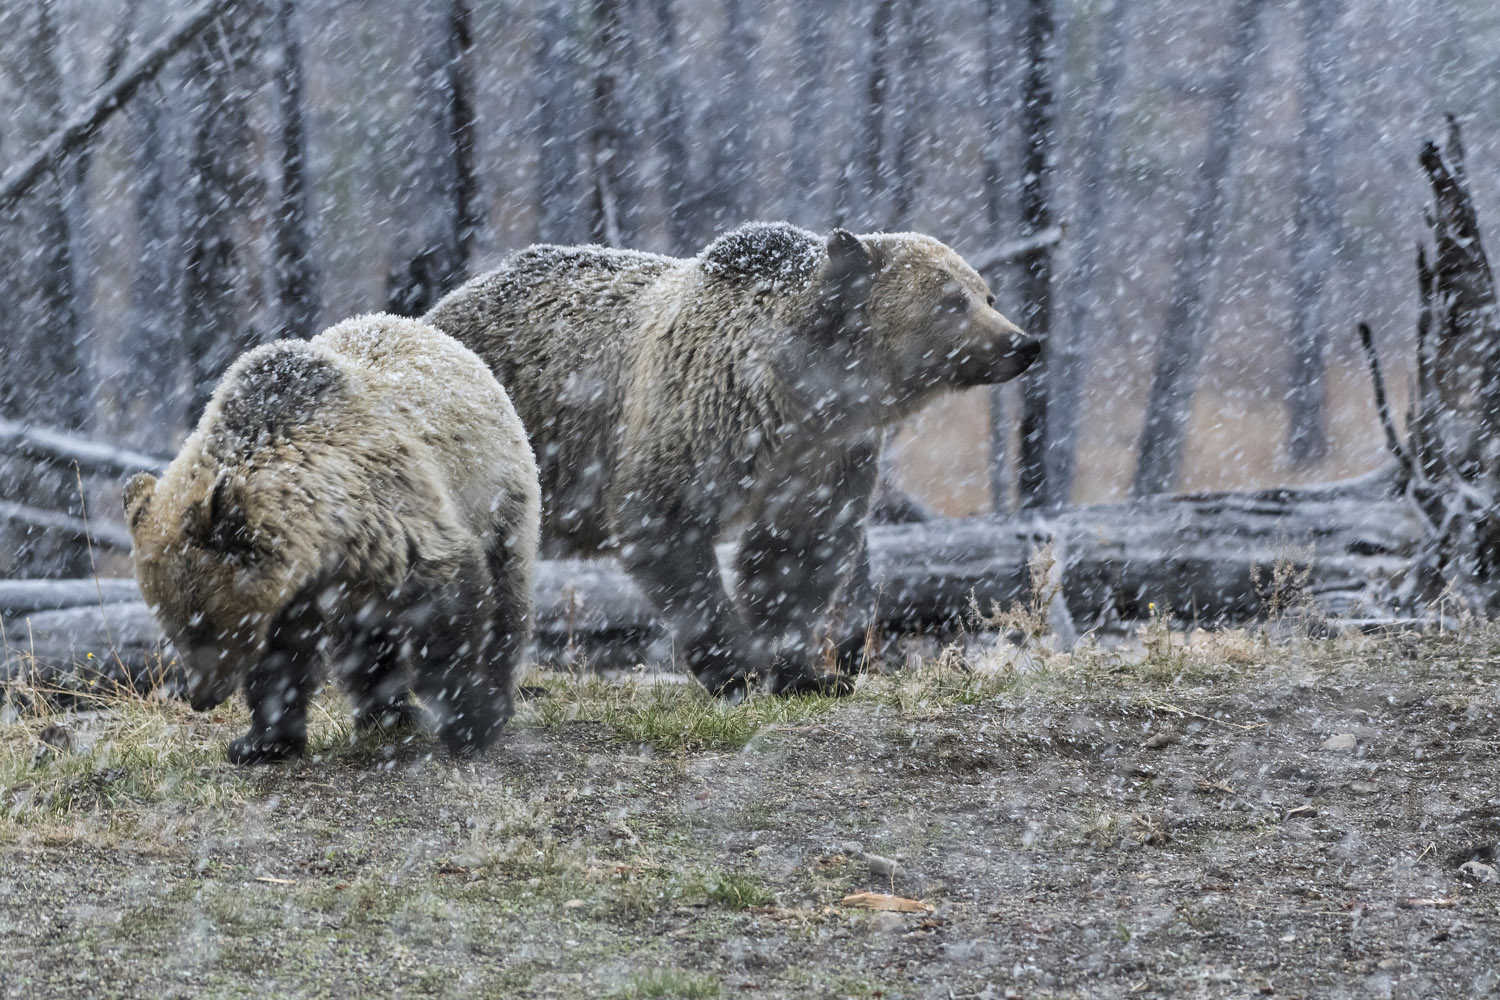 female Grizzly with cub, Yellowstone NP